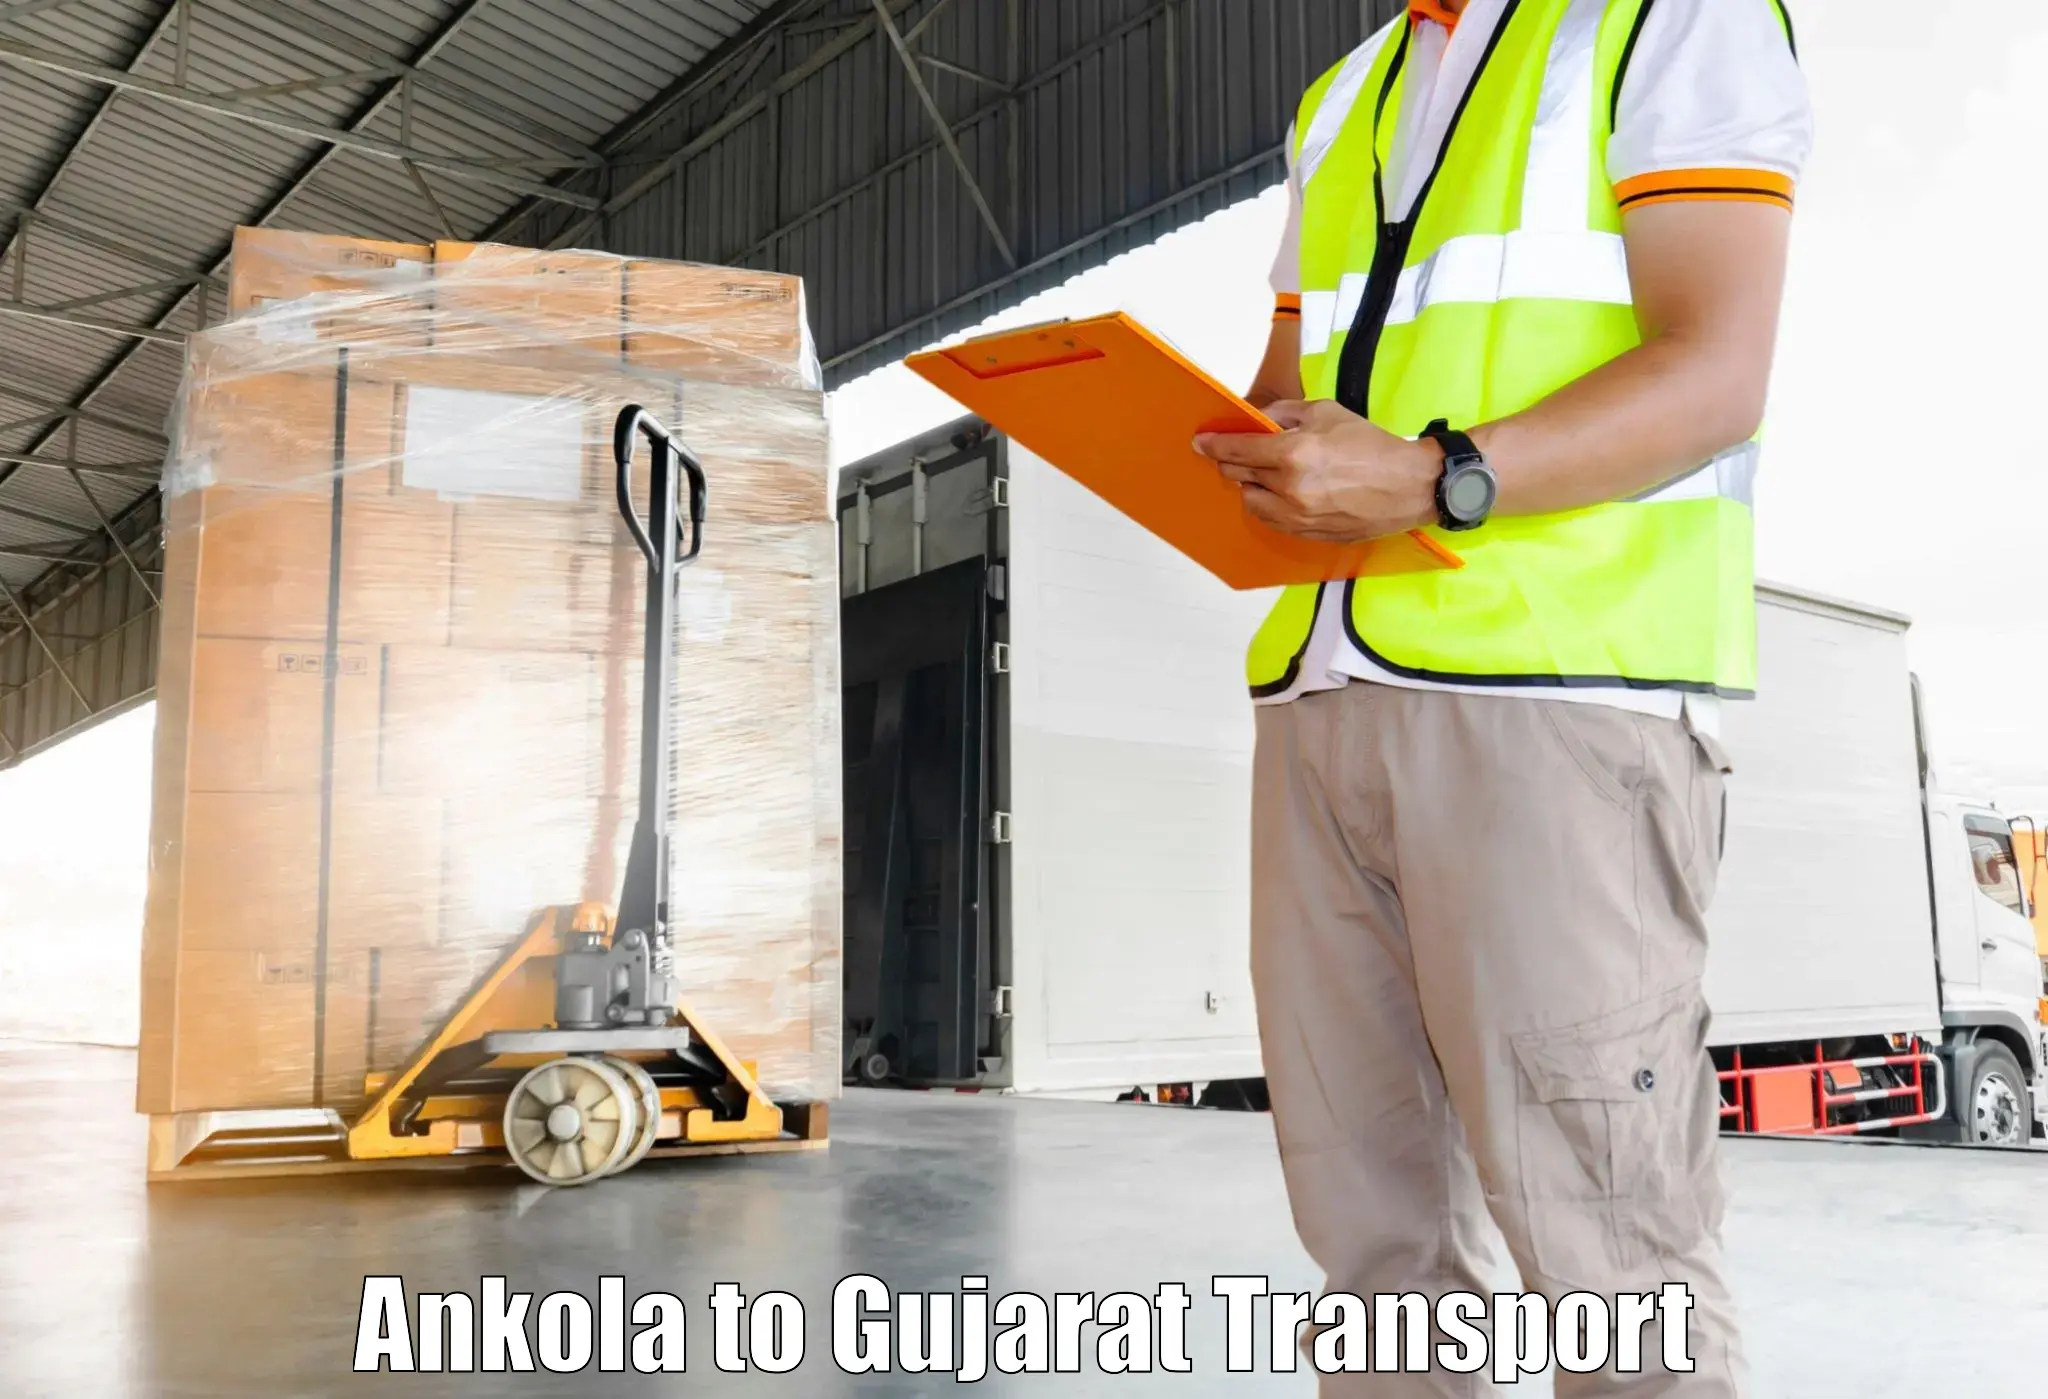 Transport bike from one state to another Ankola to Morbi